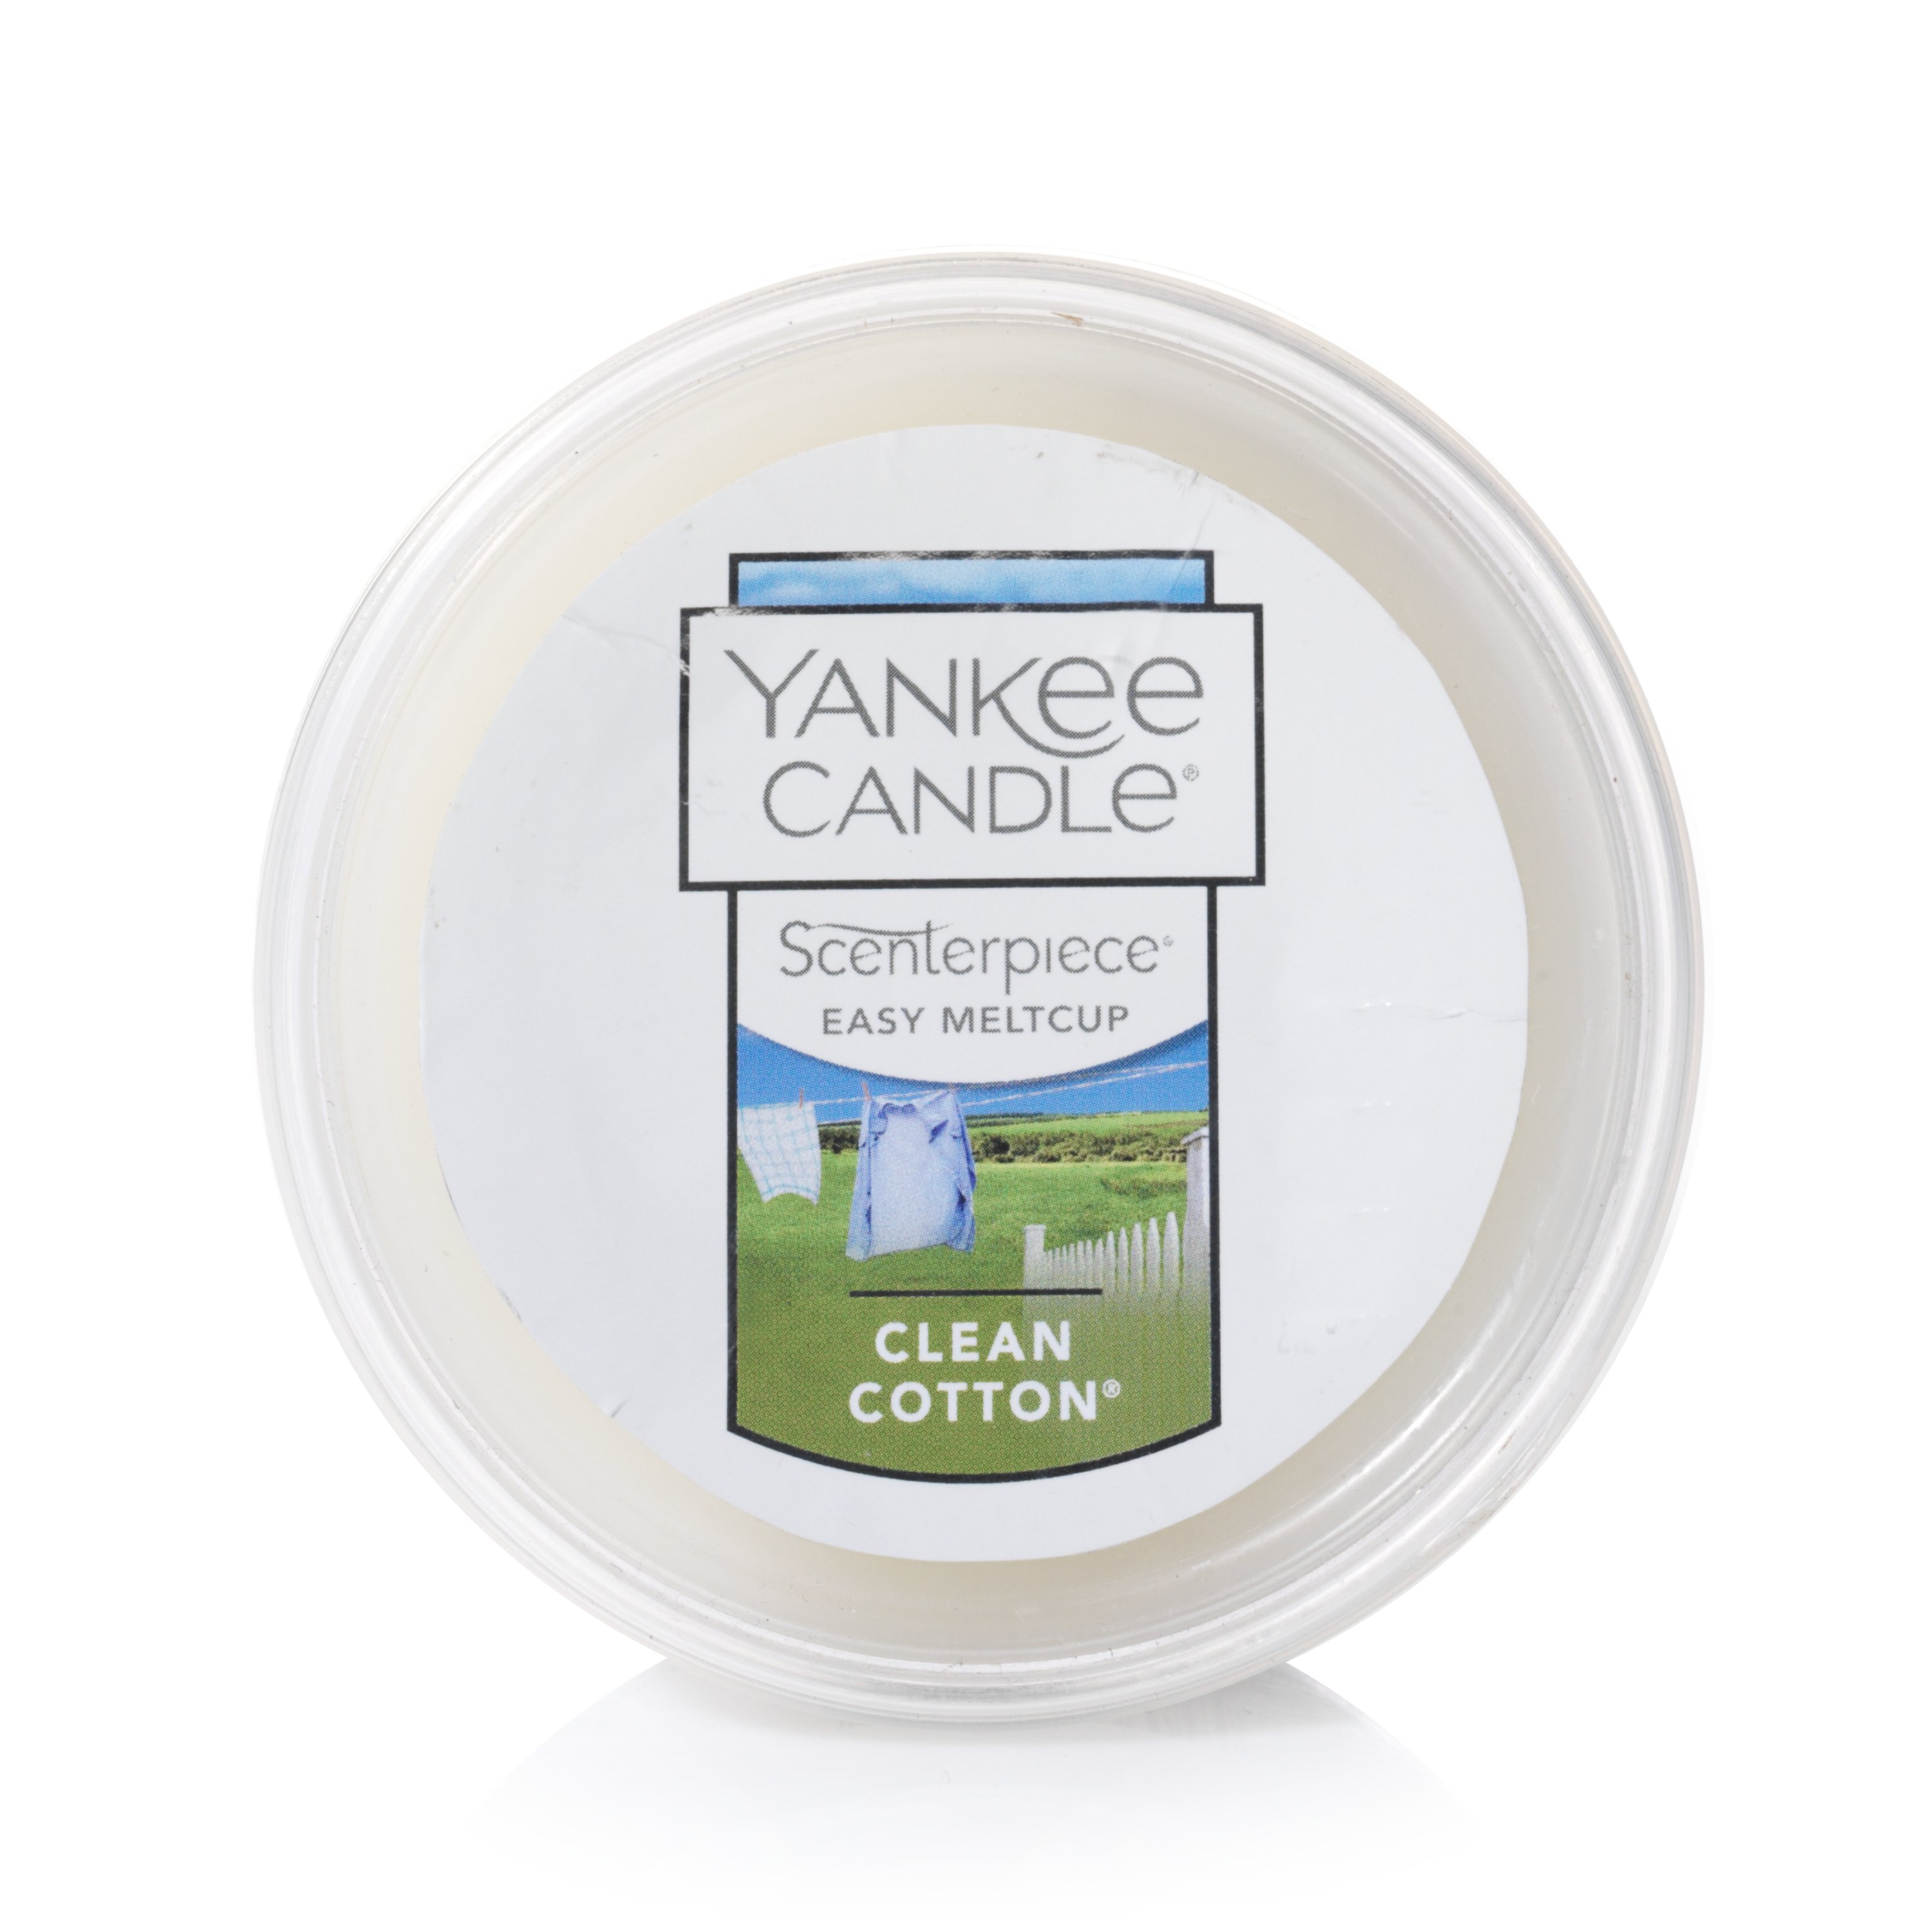 Yankee Candle Clean Cotton Concentrated Room Spray 3-Pack 